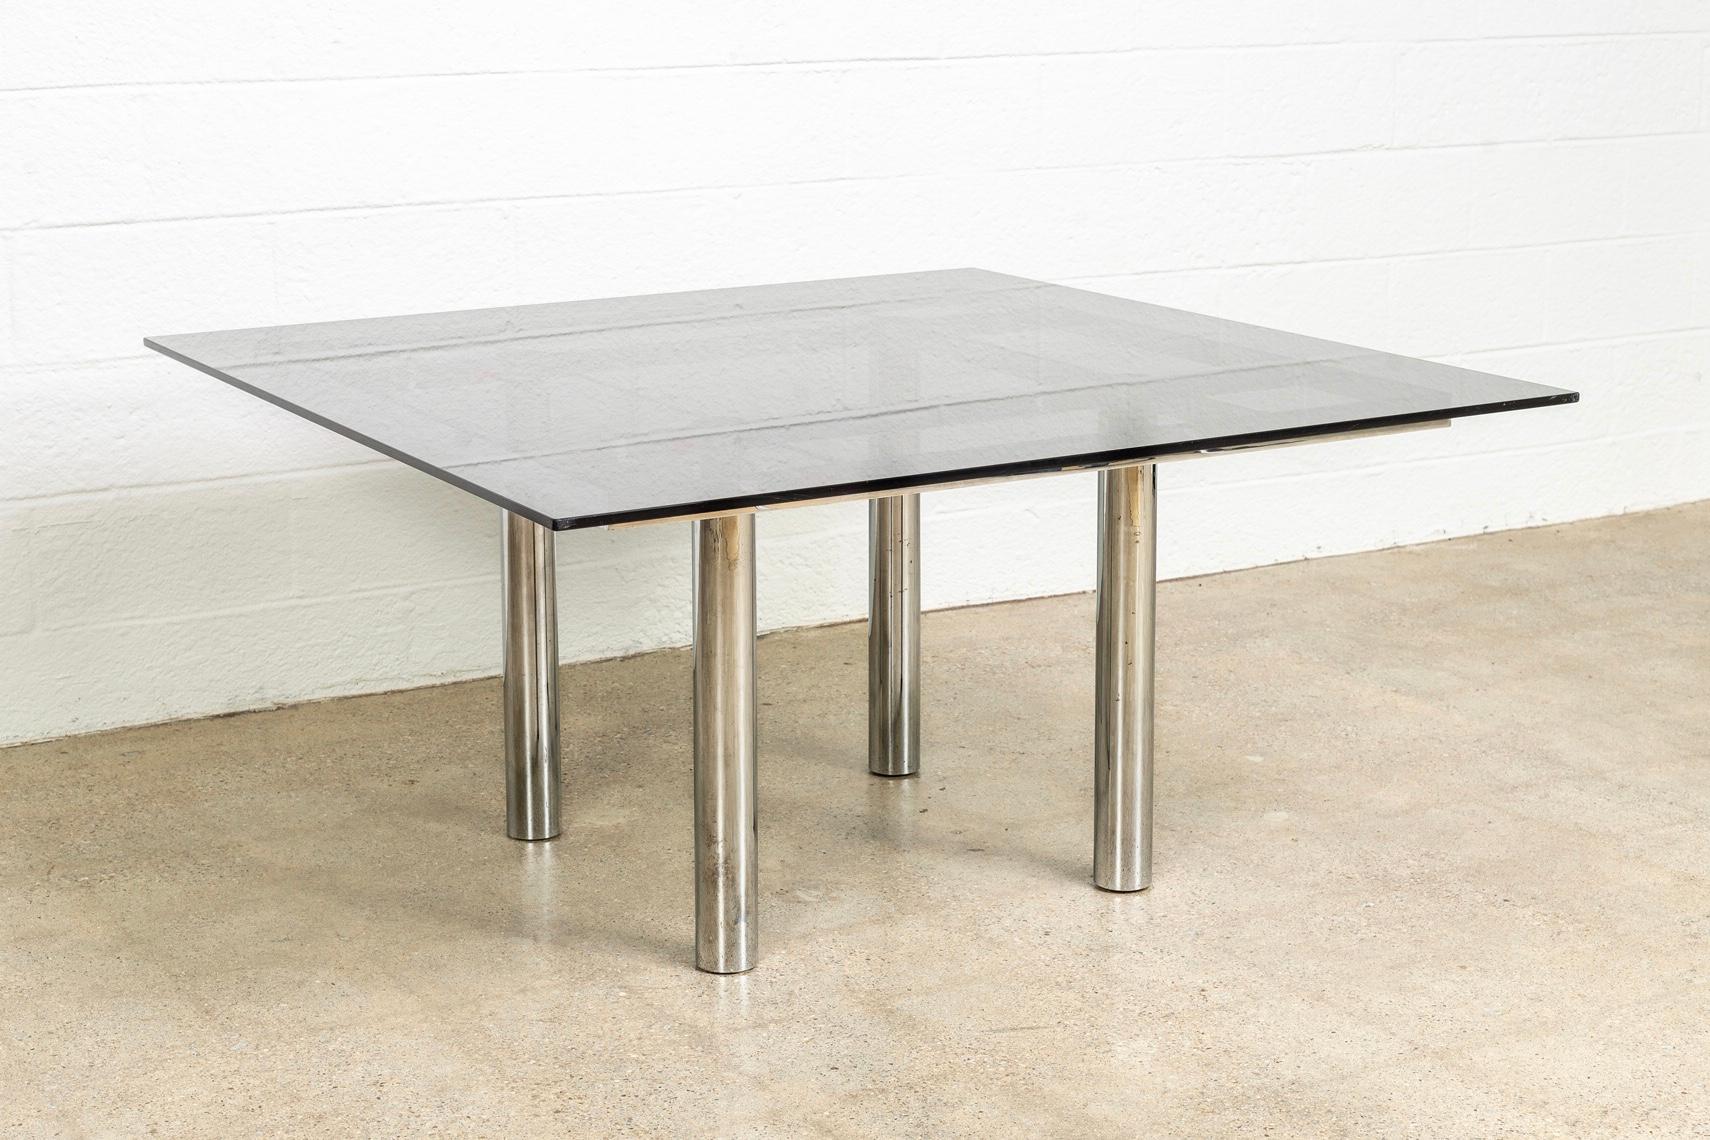 American Midcentury Tobia Scarpa for Knoll Andre Square Glass and Chrome Dining Table For Sale